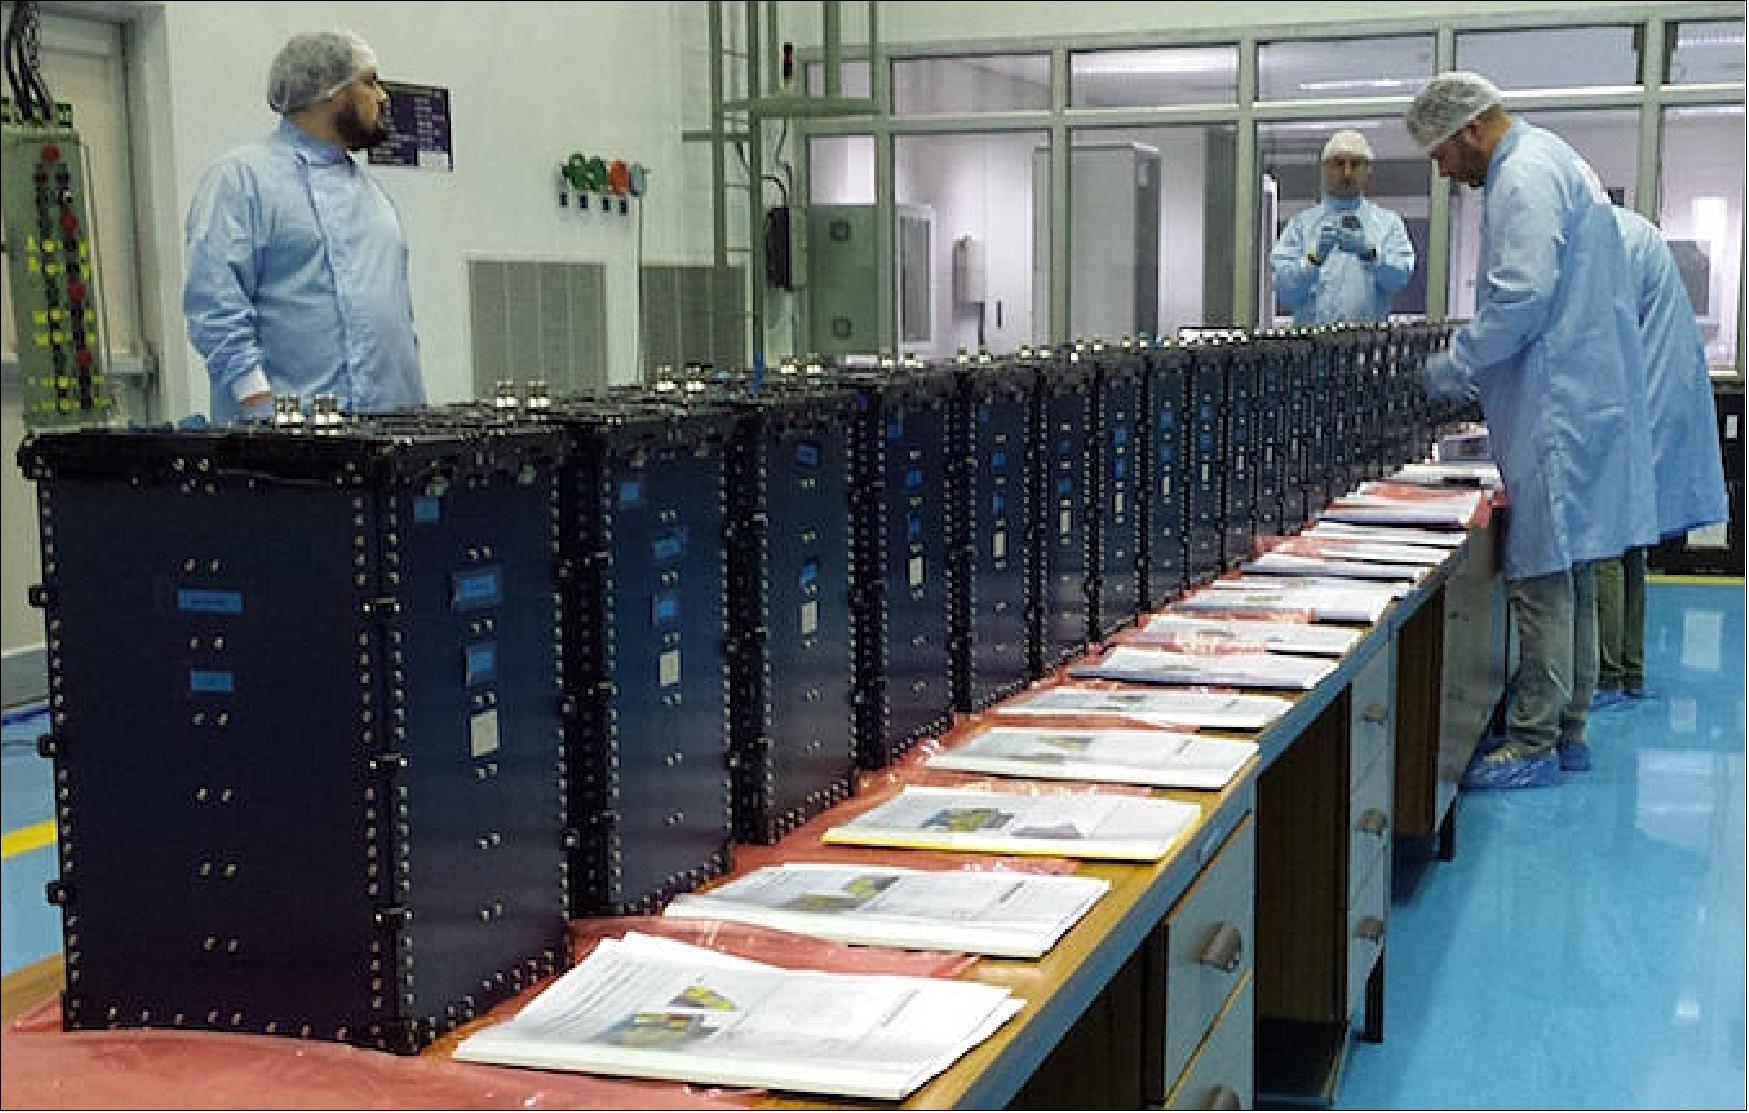 Figure 17: A view of the 25 “QuadPacks” holding 101 CubeSats preparing for launch on the PSLV-C37 mission (image credit: Innovative Solutions in Space)